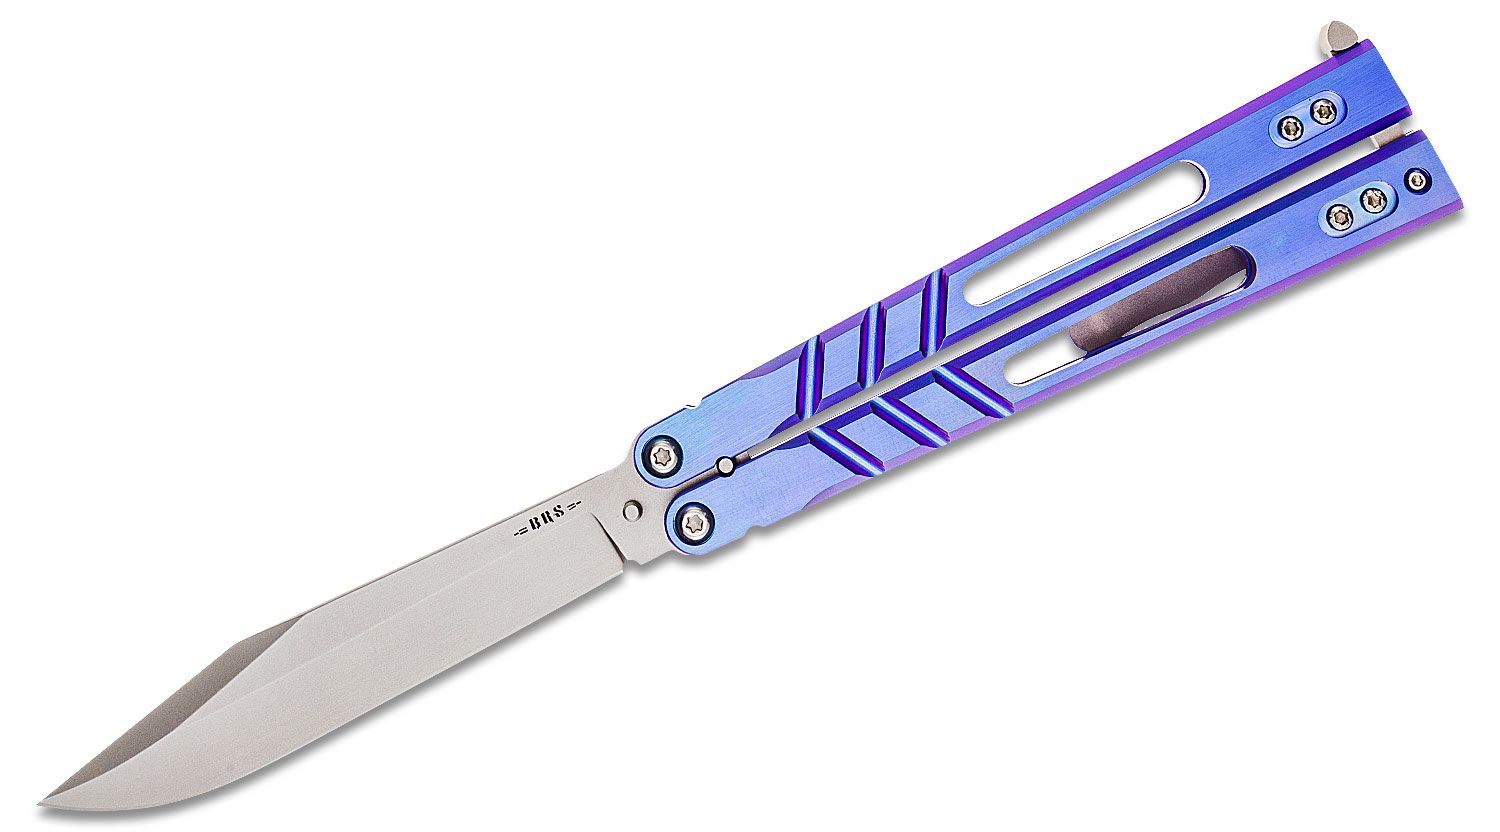 BRS Premium Replicant Balisong Butterfly Knife White G-10/Blue Ti (4.5 SW)  - Blade HQ